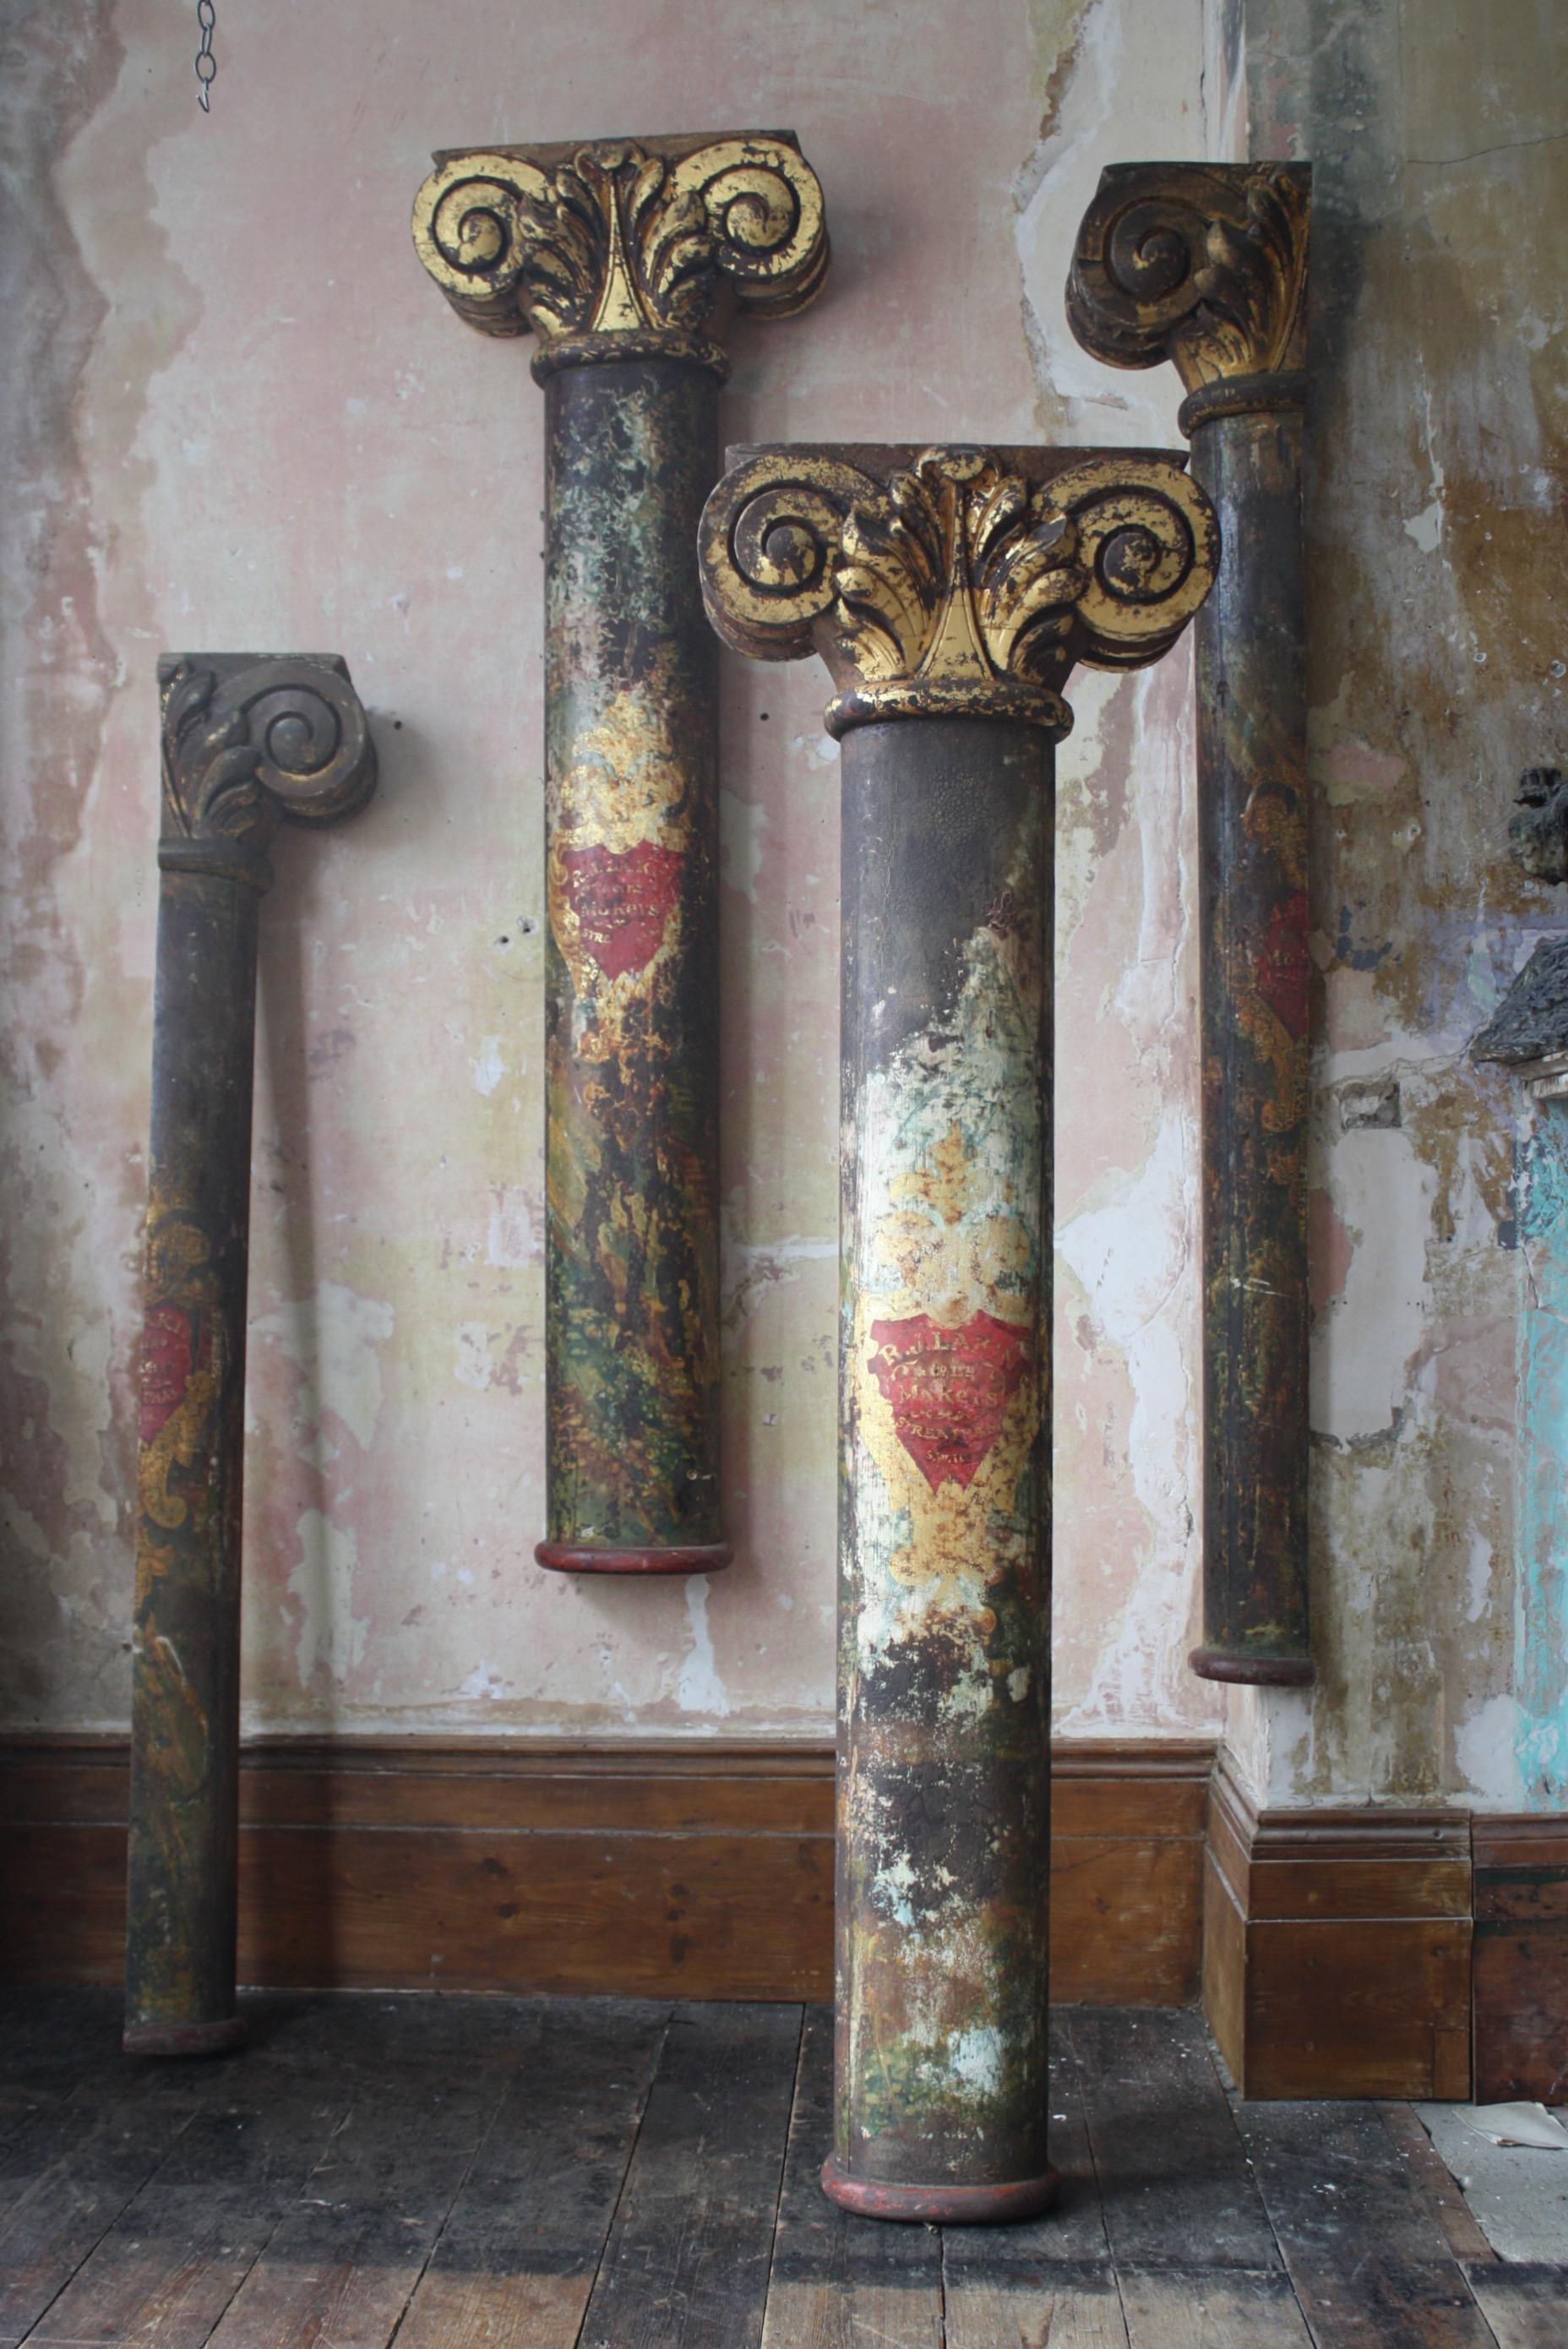 A truly fantastic group of totally original untouched decorative fairground pillars by the infamous Robert J Lakin Company of 67 Besley Street, Streatham, London

The pillars are hollow in construction with deeply carved capitals, with the Lakin